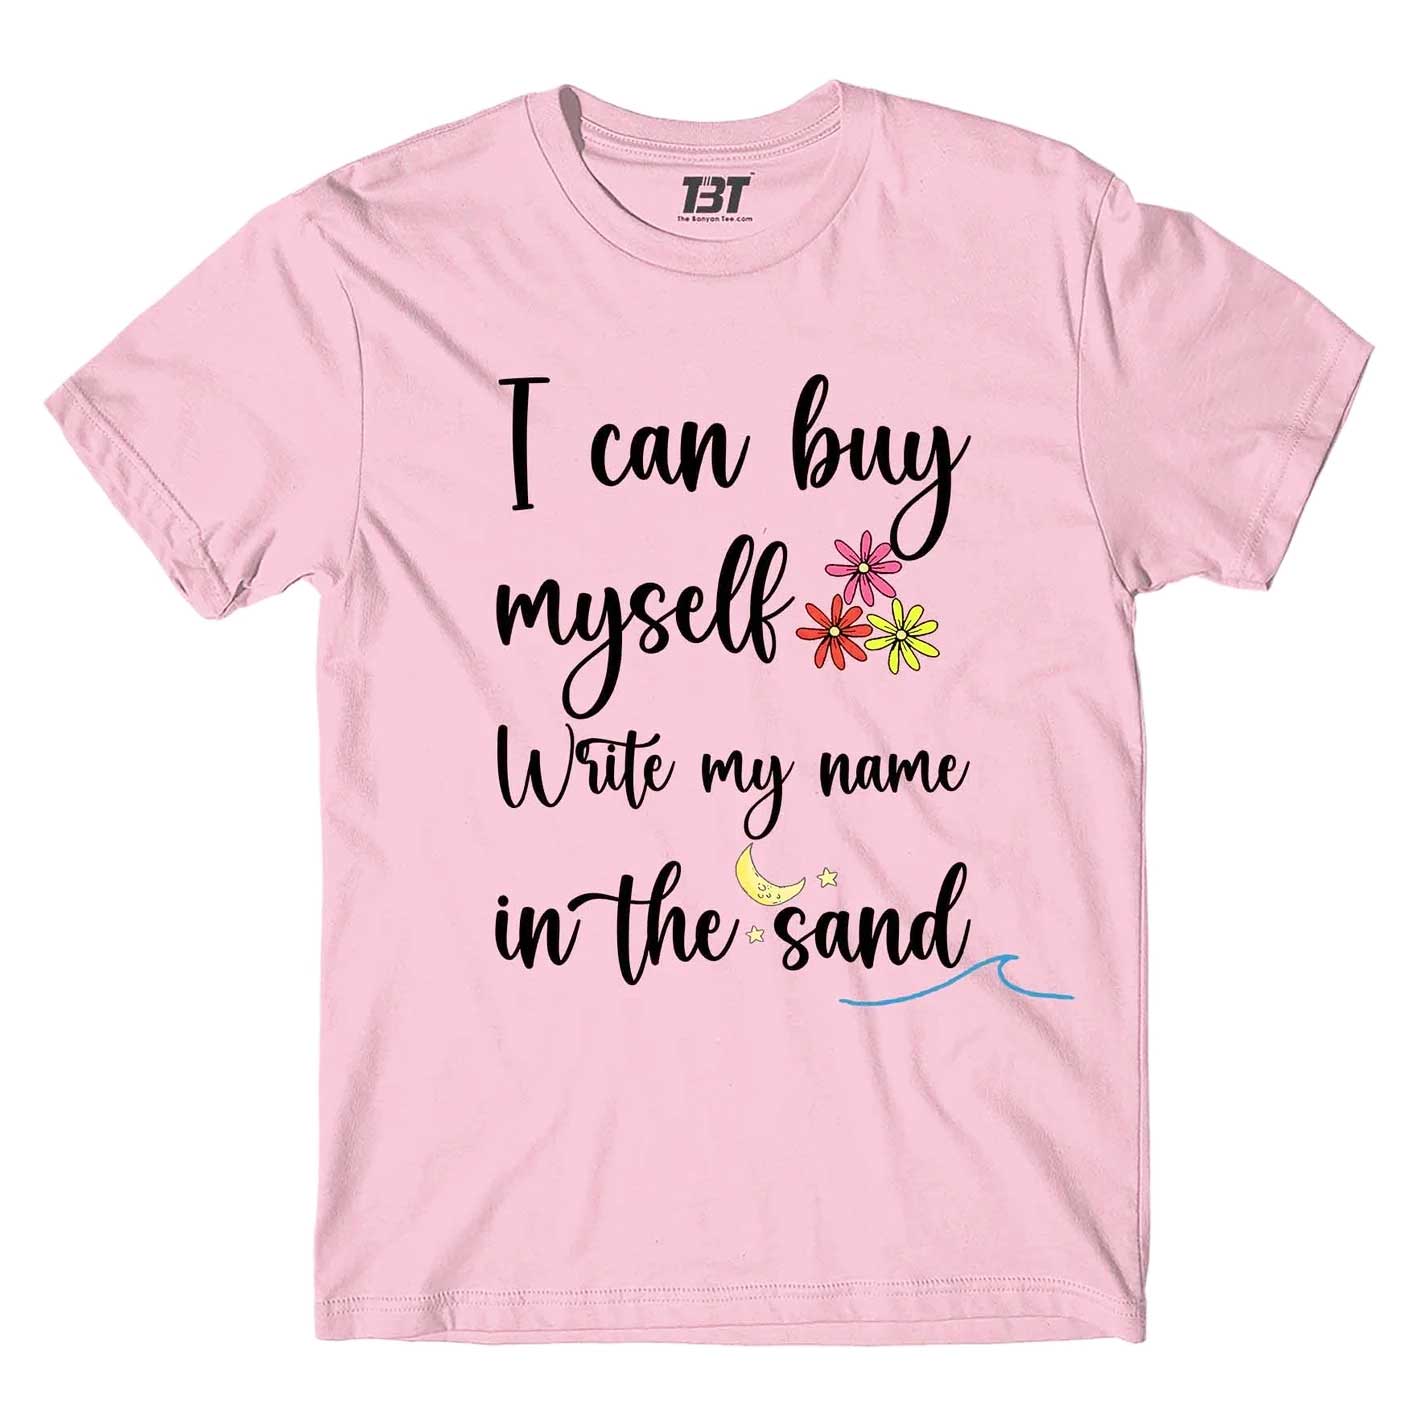 miley cyrus flowers t-shirt music band buy online usa united states the banyan tee tbt men women girls boys unisex baby pink i can buy myself flowers